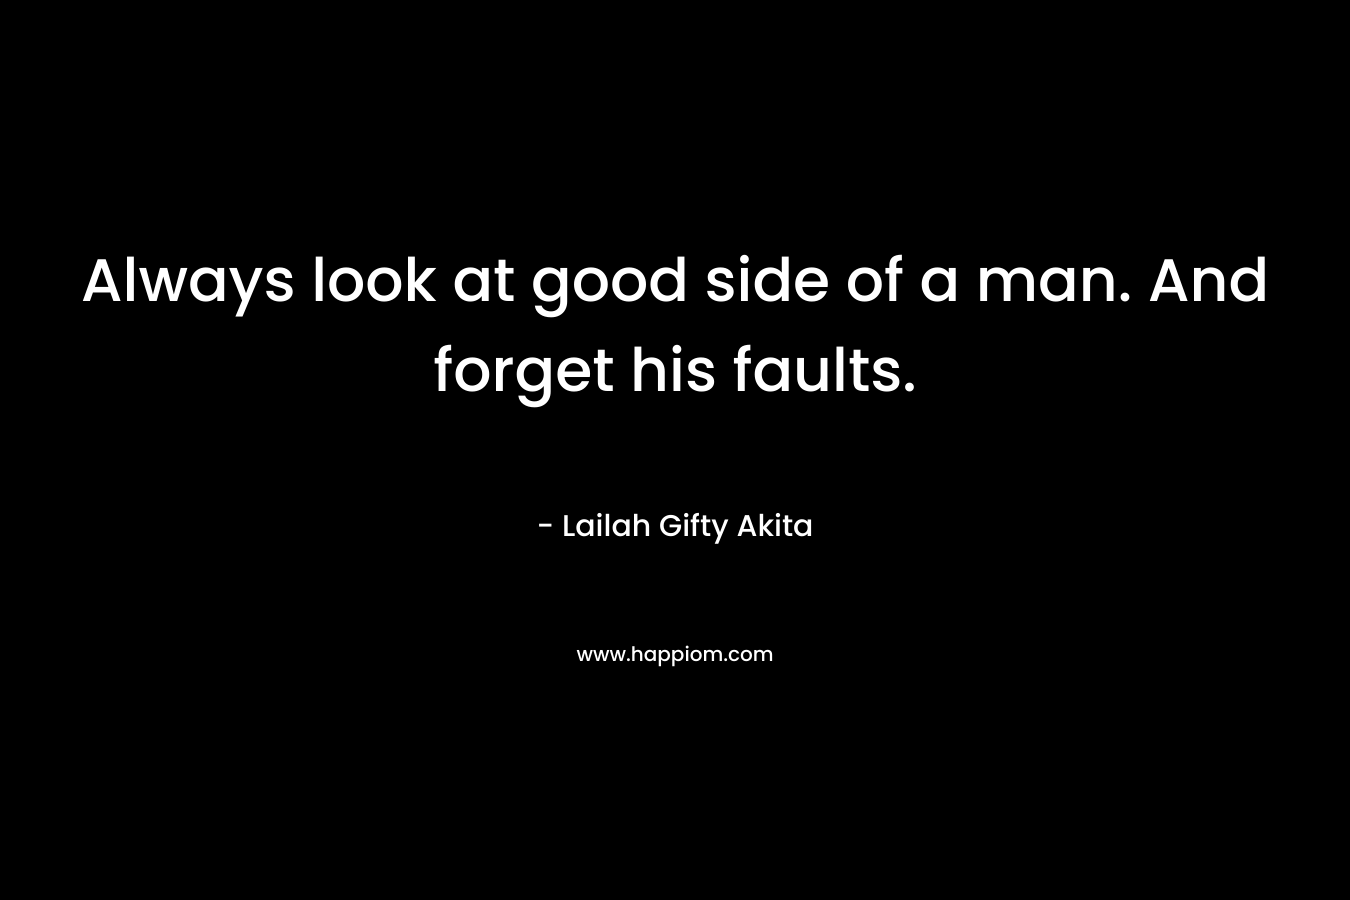 Always look at good side of a man. And forget his faults.